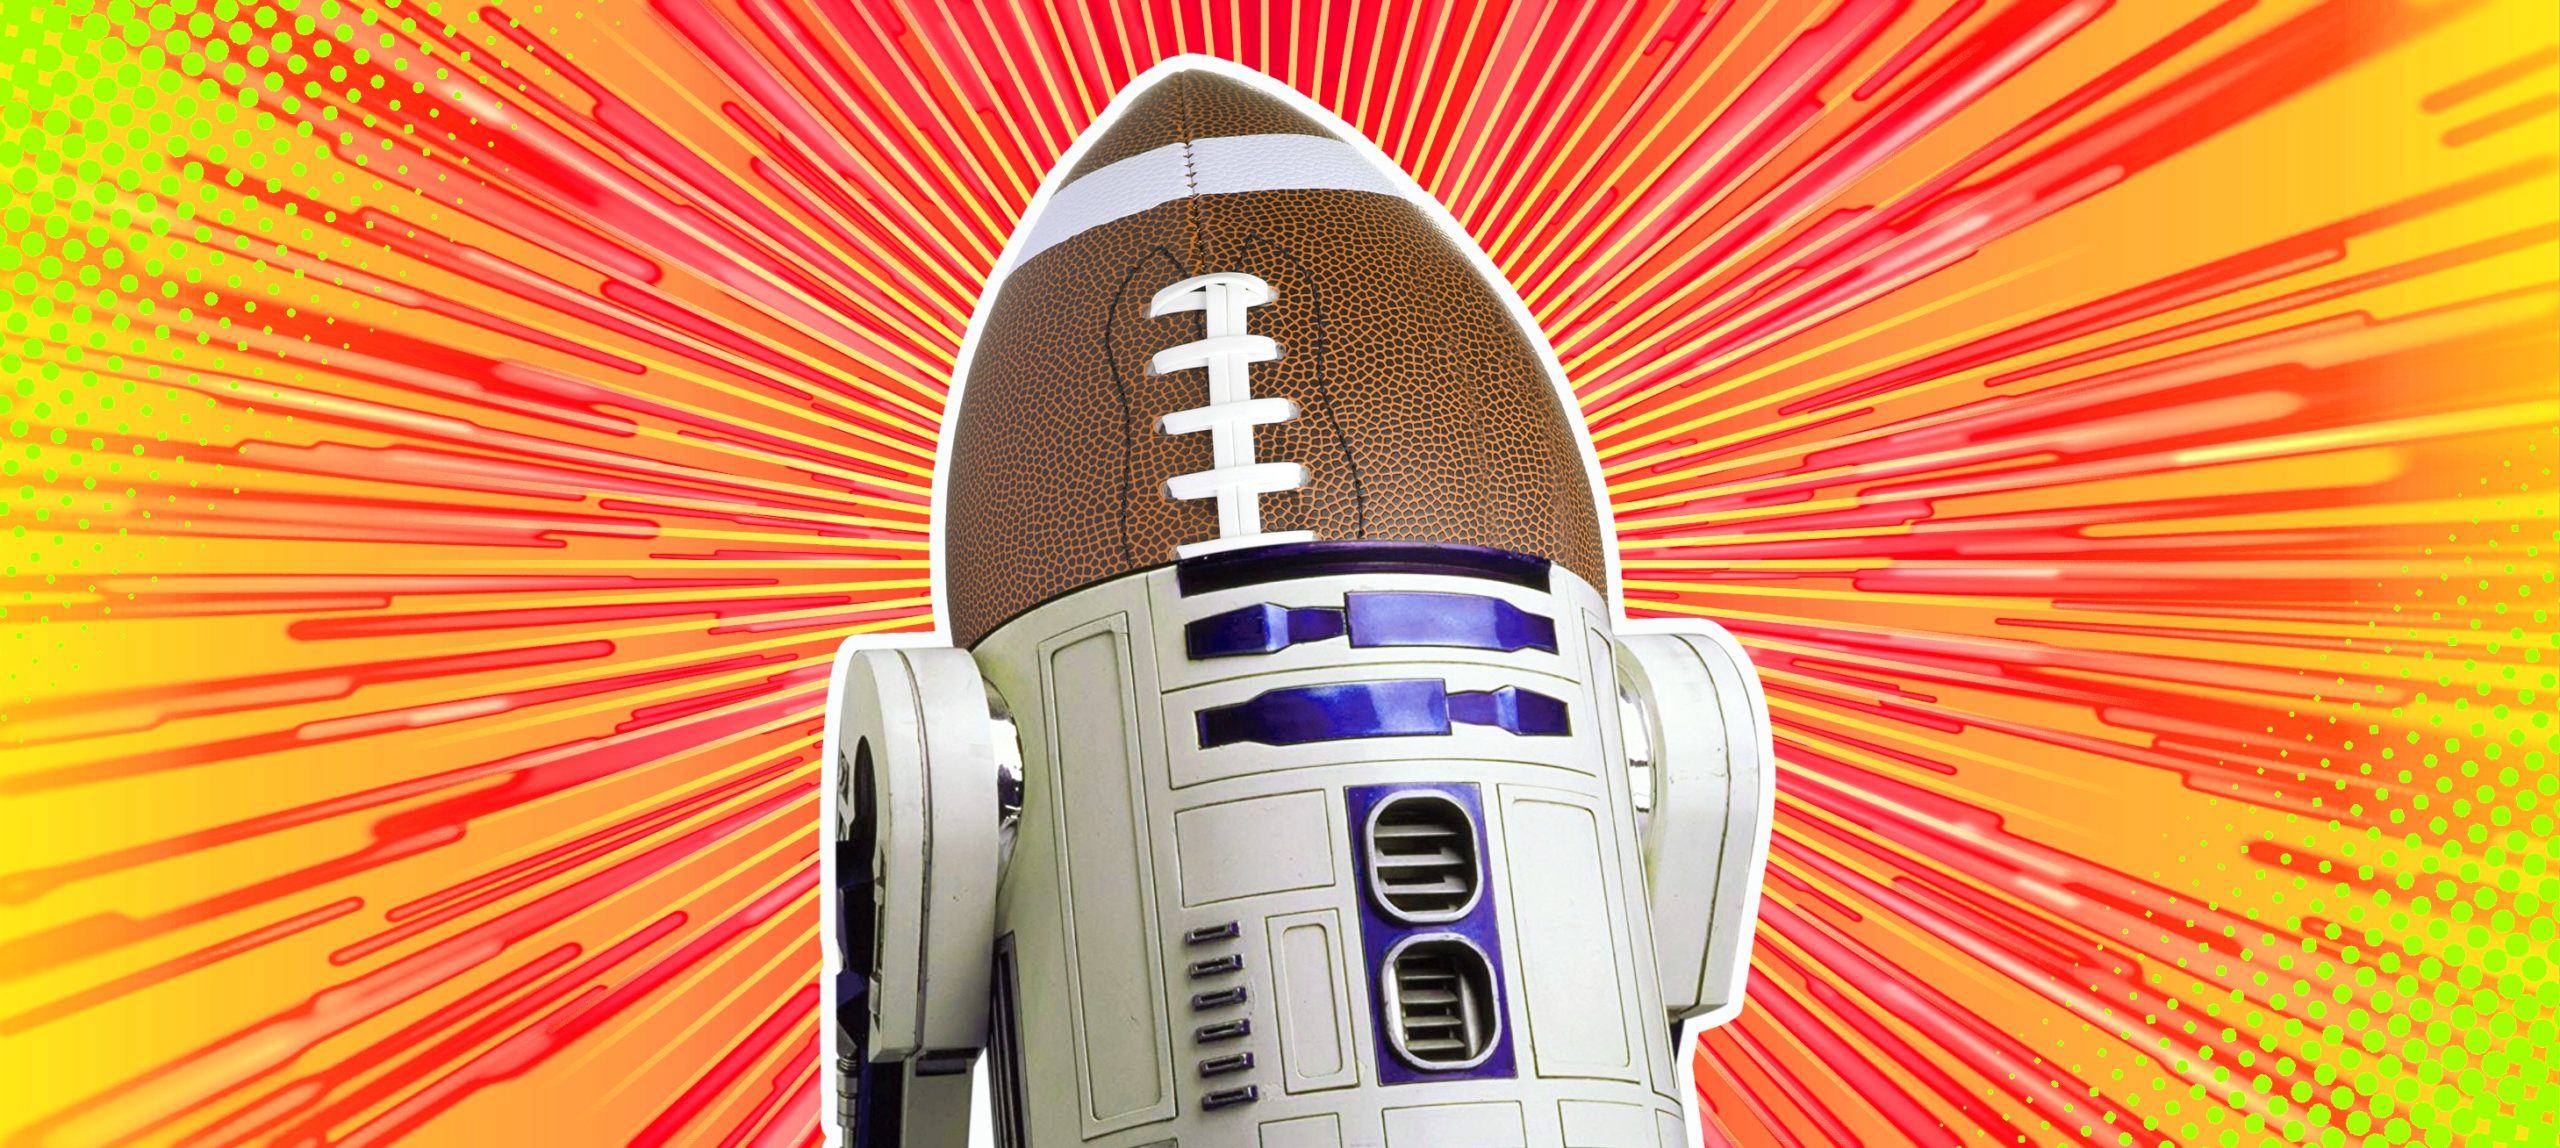 Star Wars to NFL comparisons, May the 4th be With You